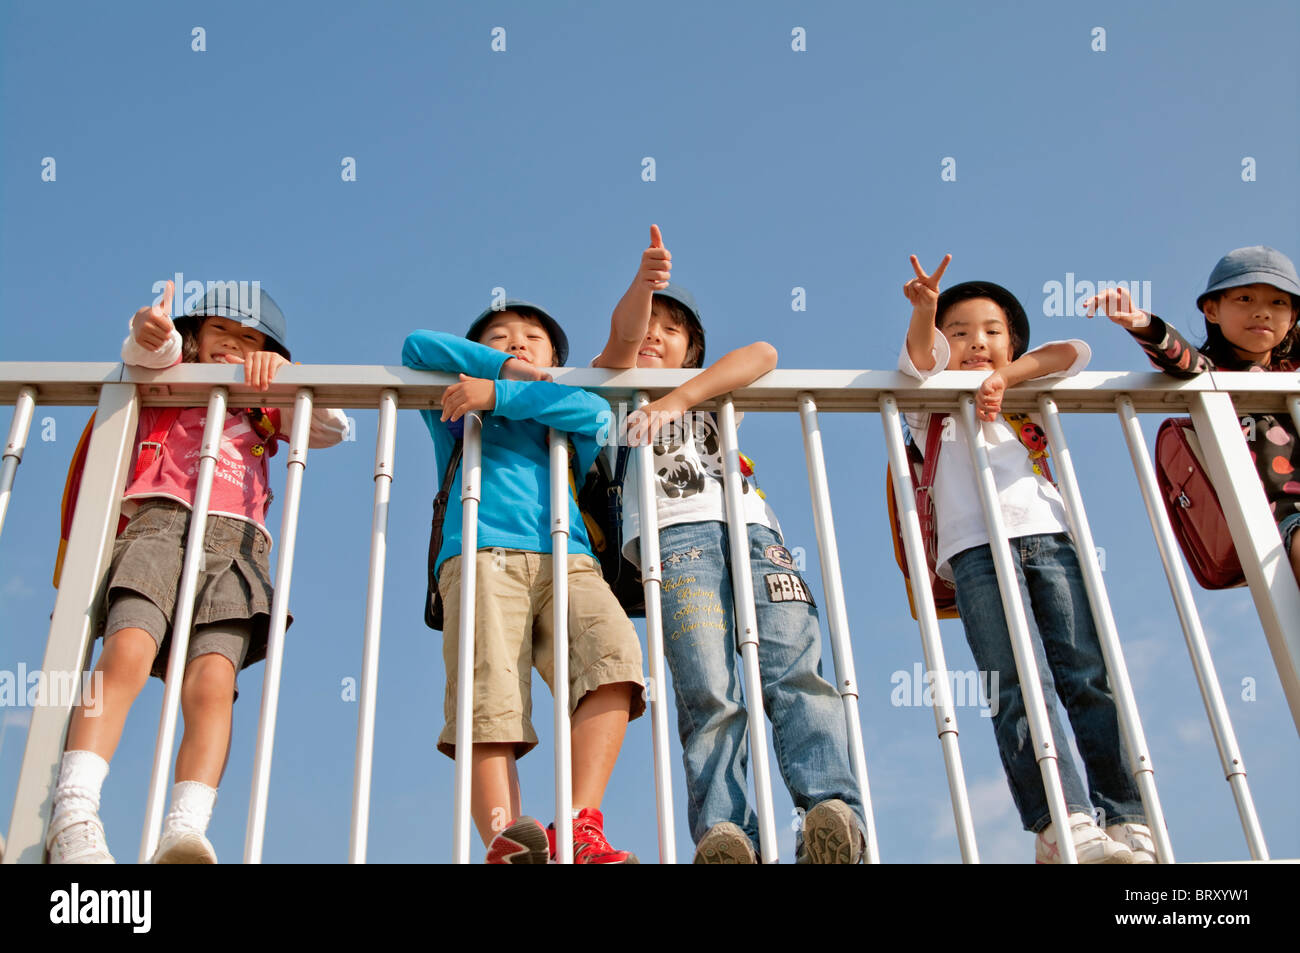 Boys and girls giving thumbs up and peace sign Low angle view Japan Stock Photo